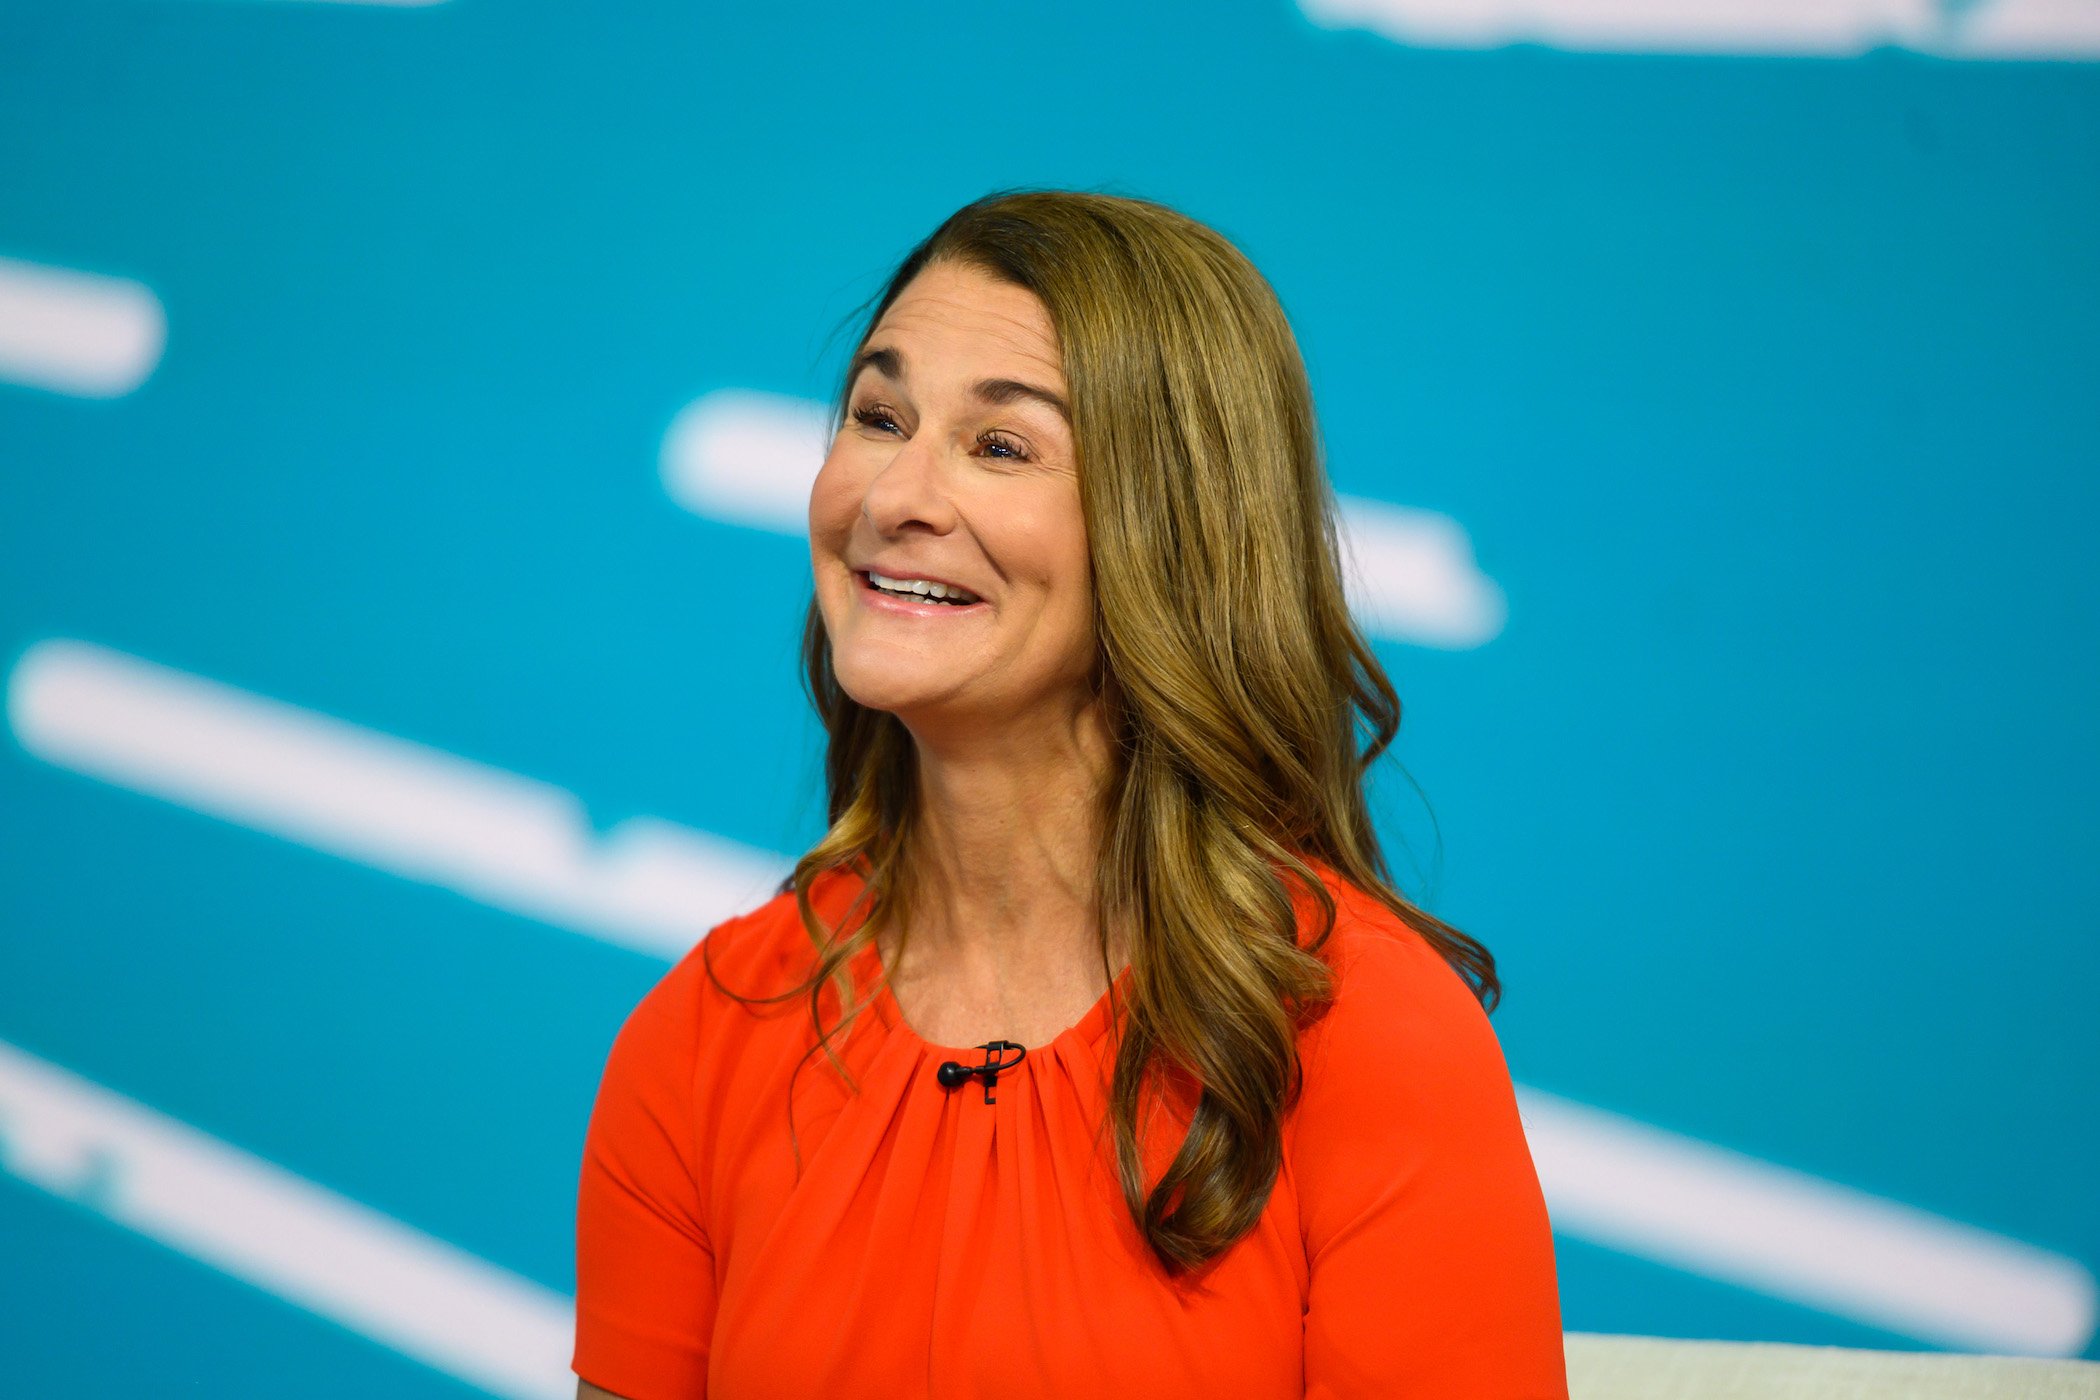 What is Melinda Gates' Net Worth? How Did She Earn Her Money?